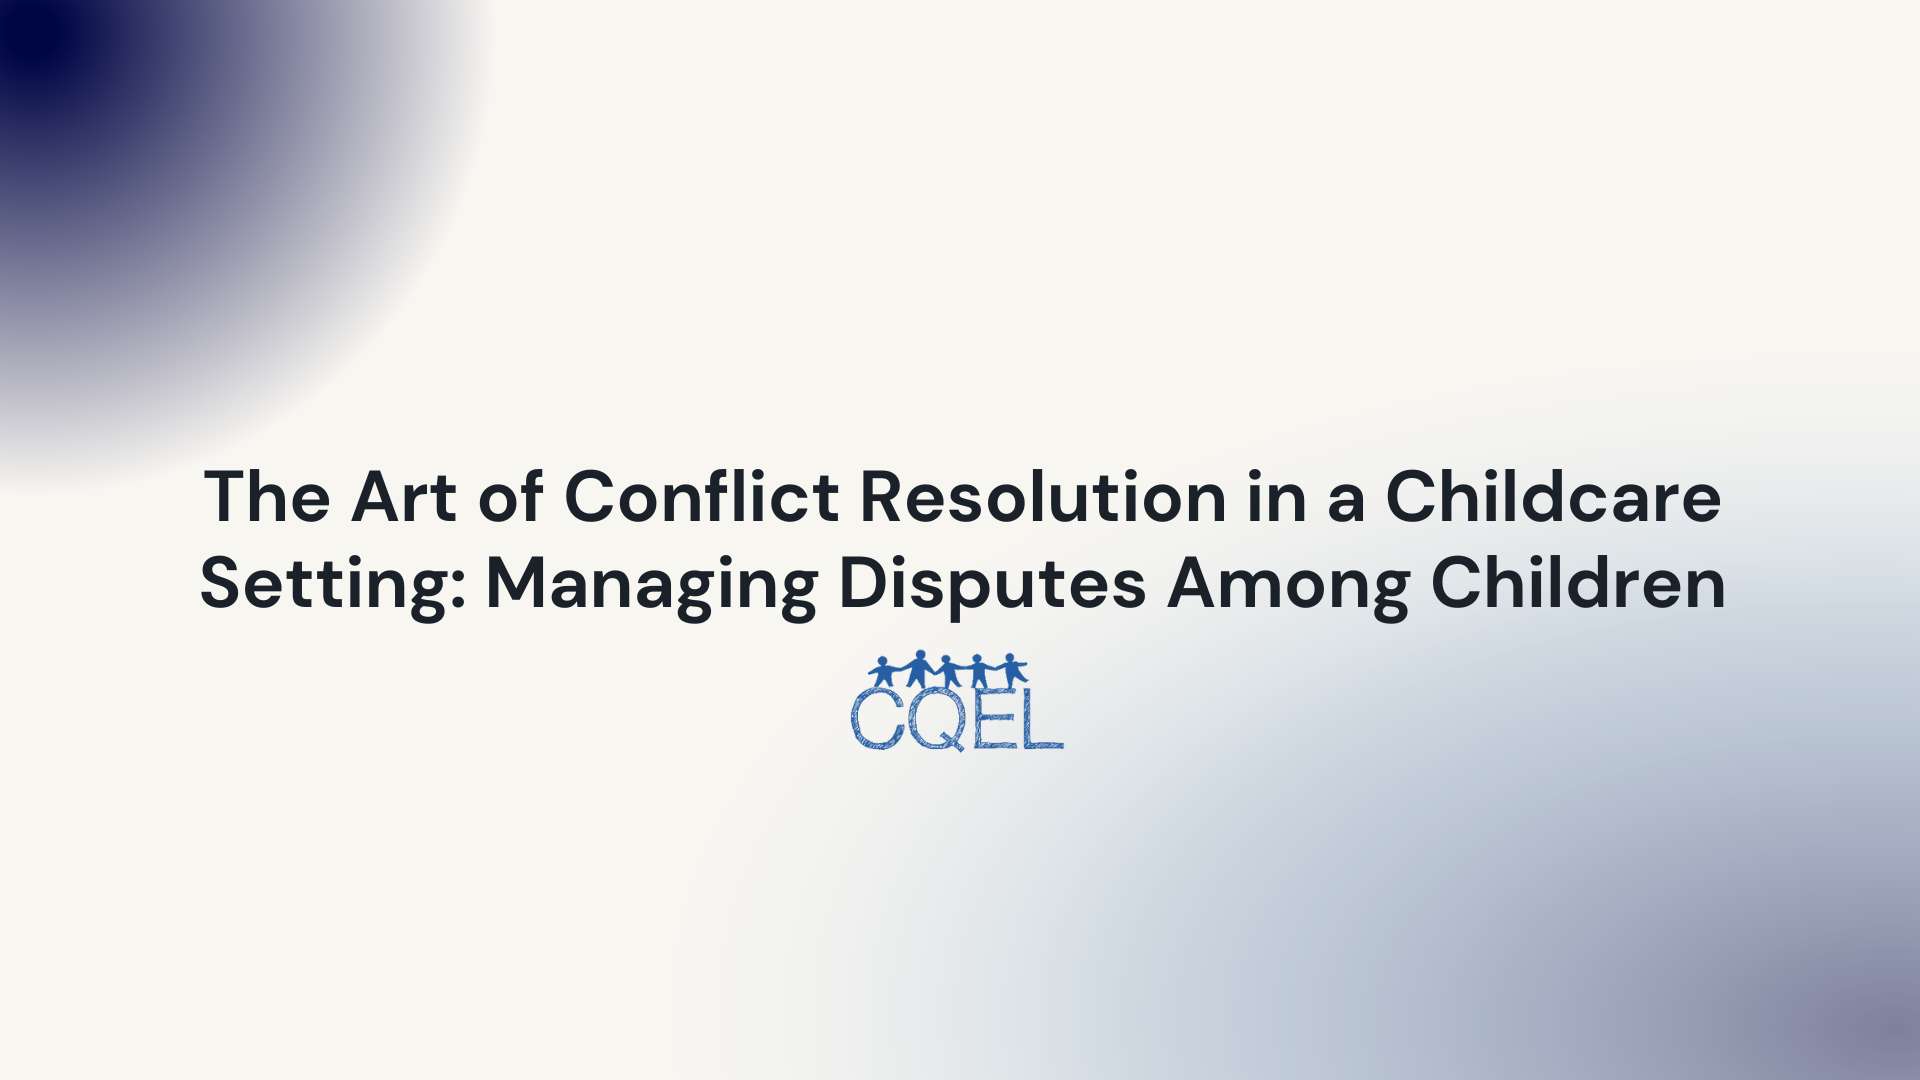 The Art of Conflict Resolution in a Childcare Setting: Managing Disputes Among Children